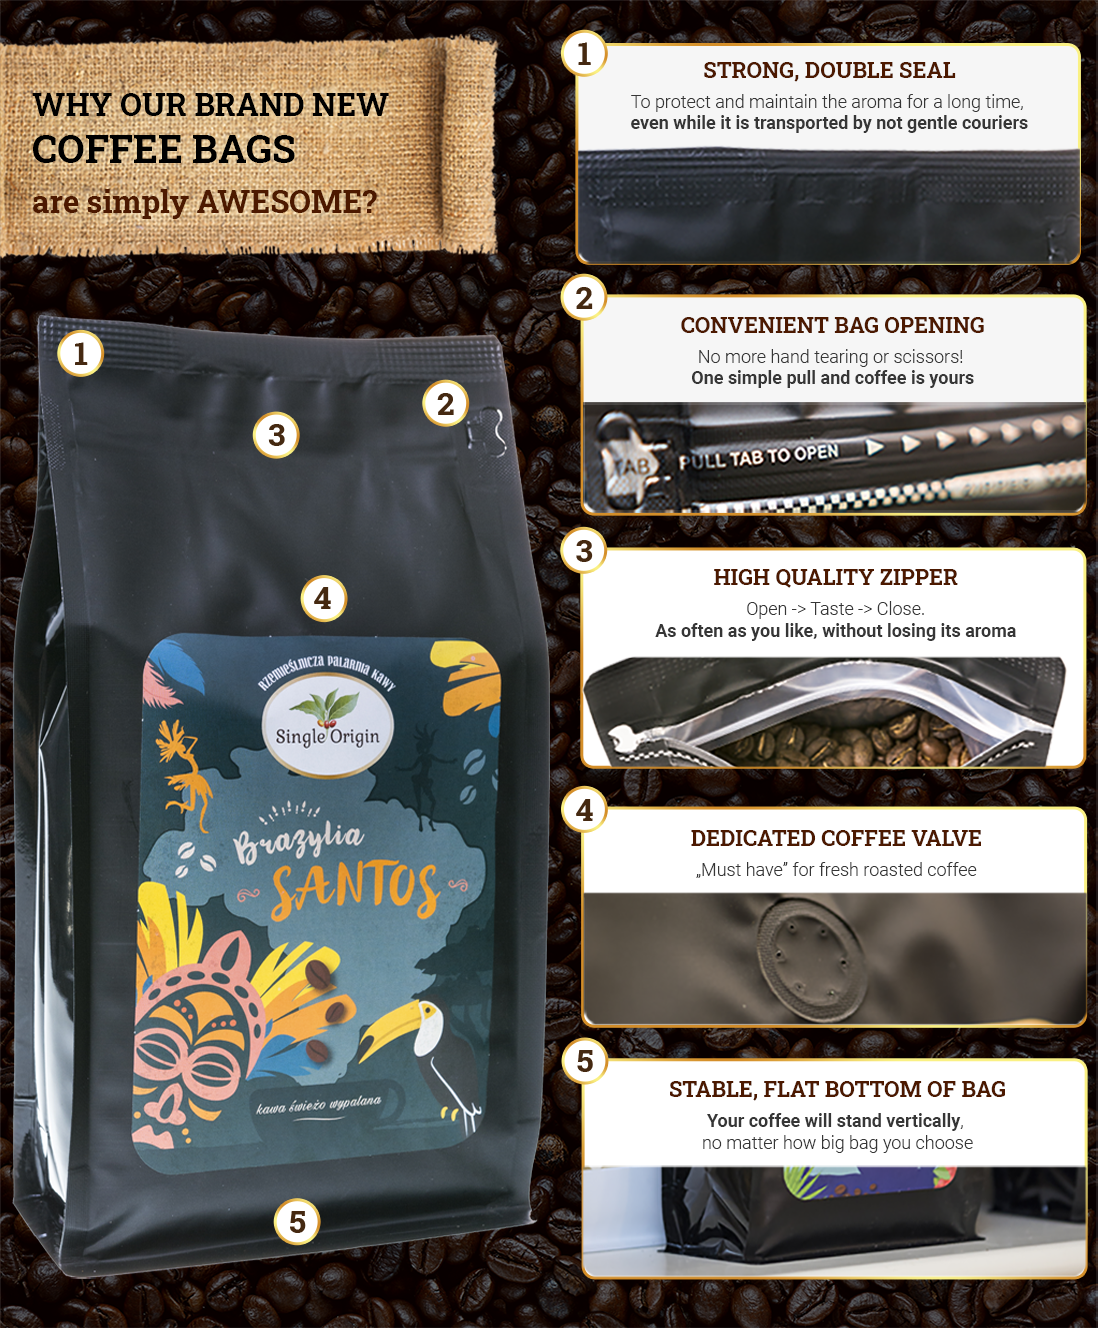 Our coffee bags